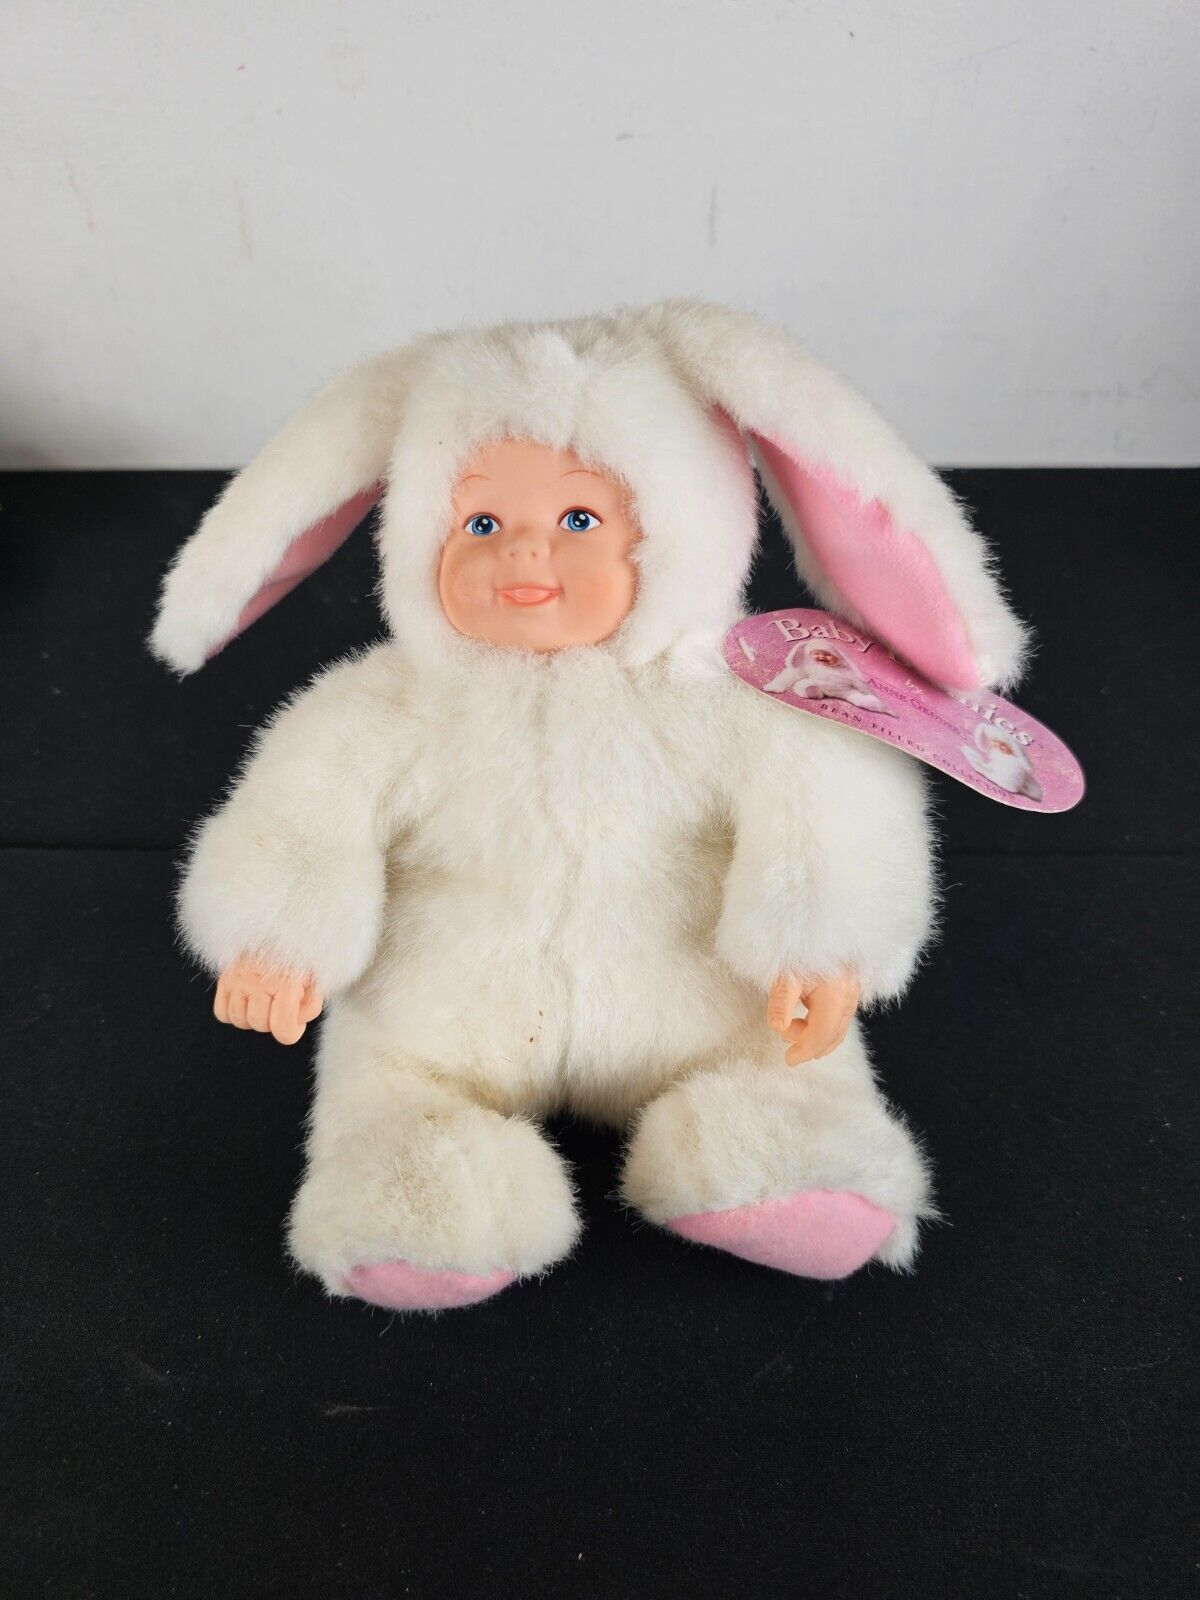 Vintage 1997 Anne Geddes Baby Bunnies Plush Doll  in Bunny Outfit New Old Stock - $19.75